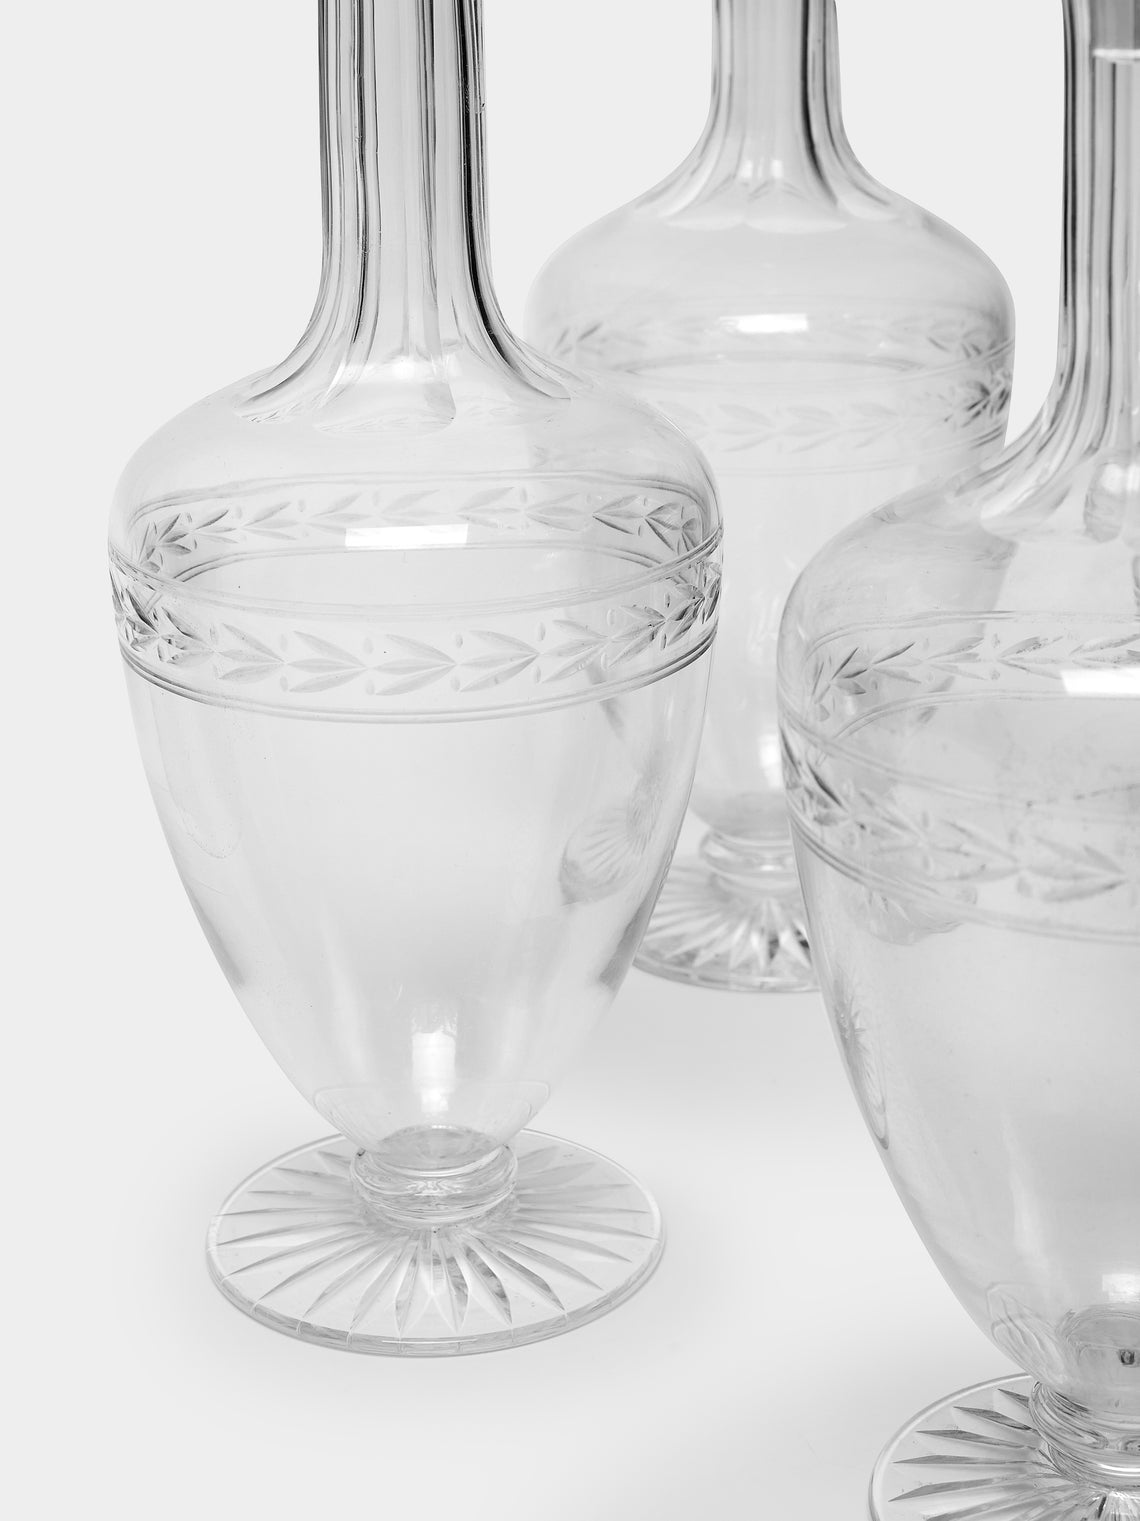 Antique and Vintage - 1930s Engraved Crystal Decanters (Set of 5) -  - ABASK